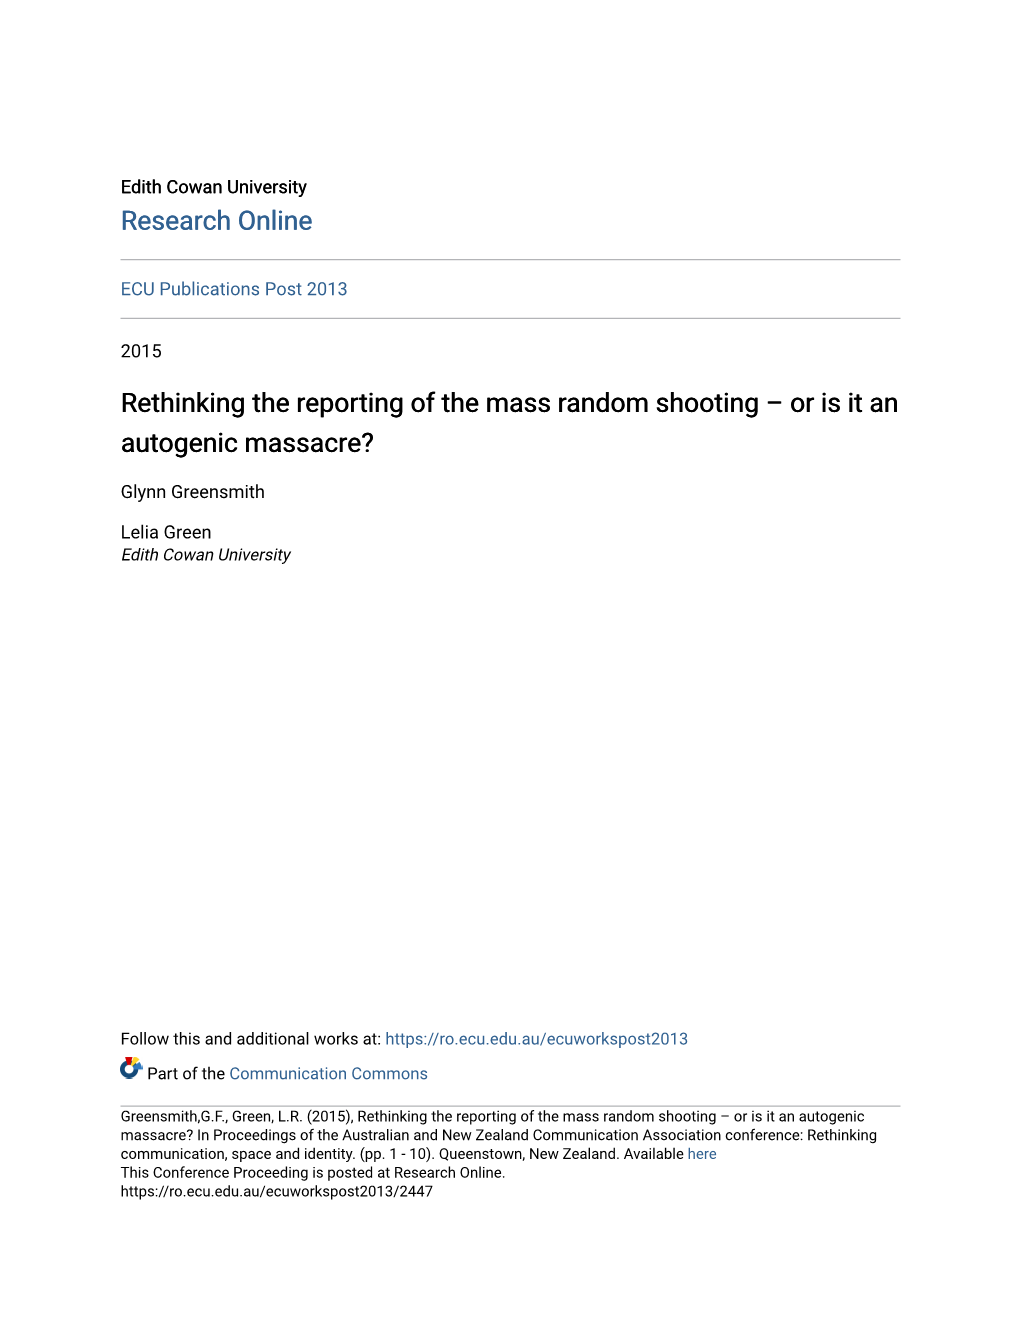 Rethinking the Reporting of the Mass Random Shooting – Or Is It an Autogenic Massacre?